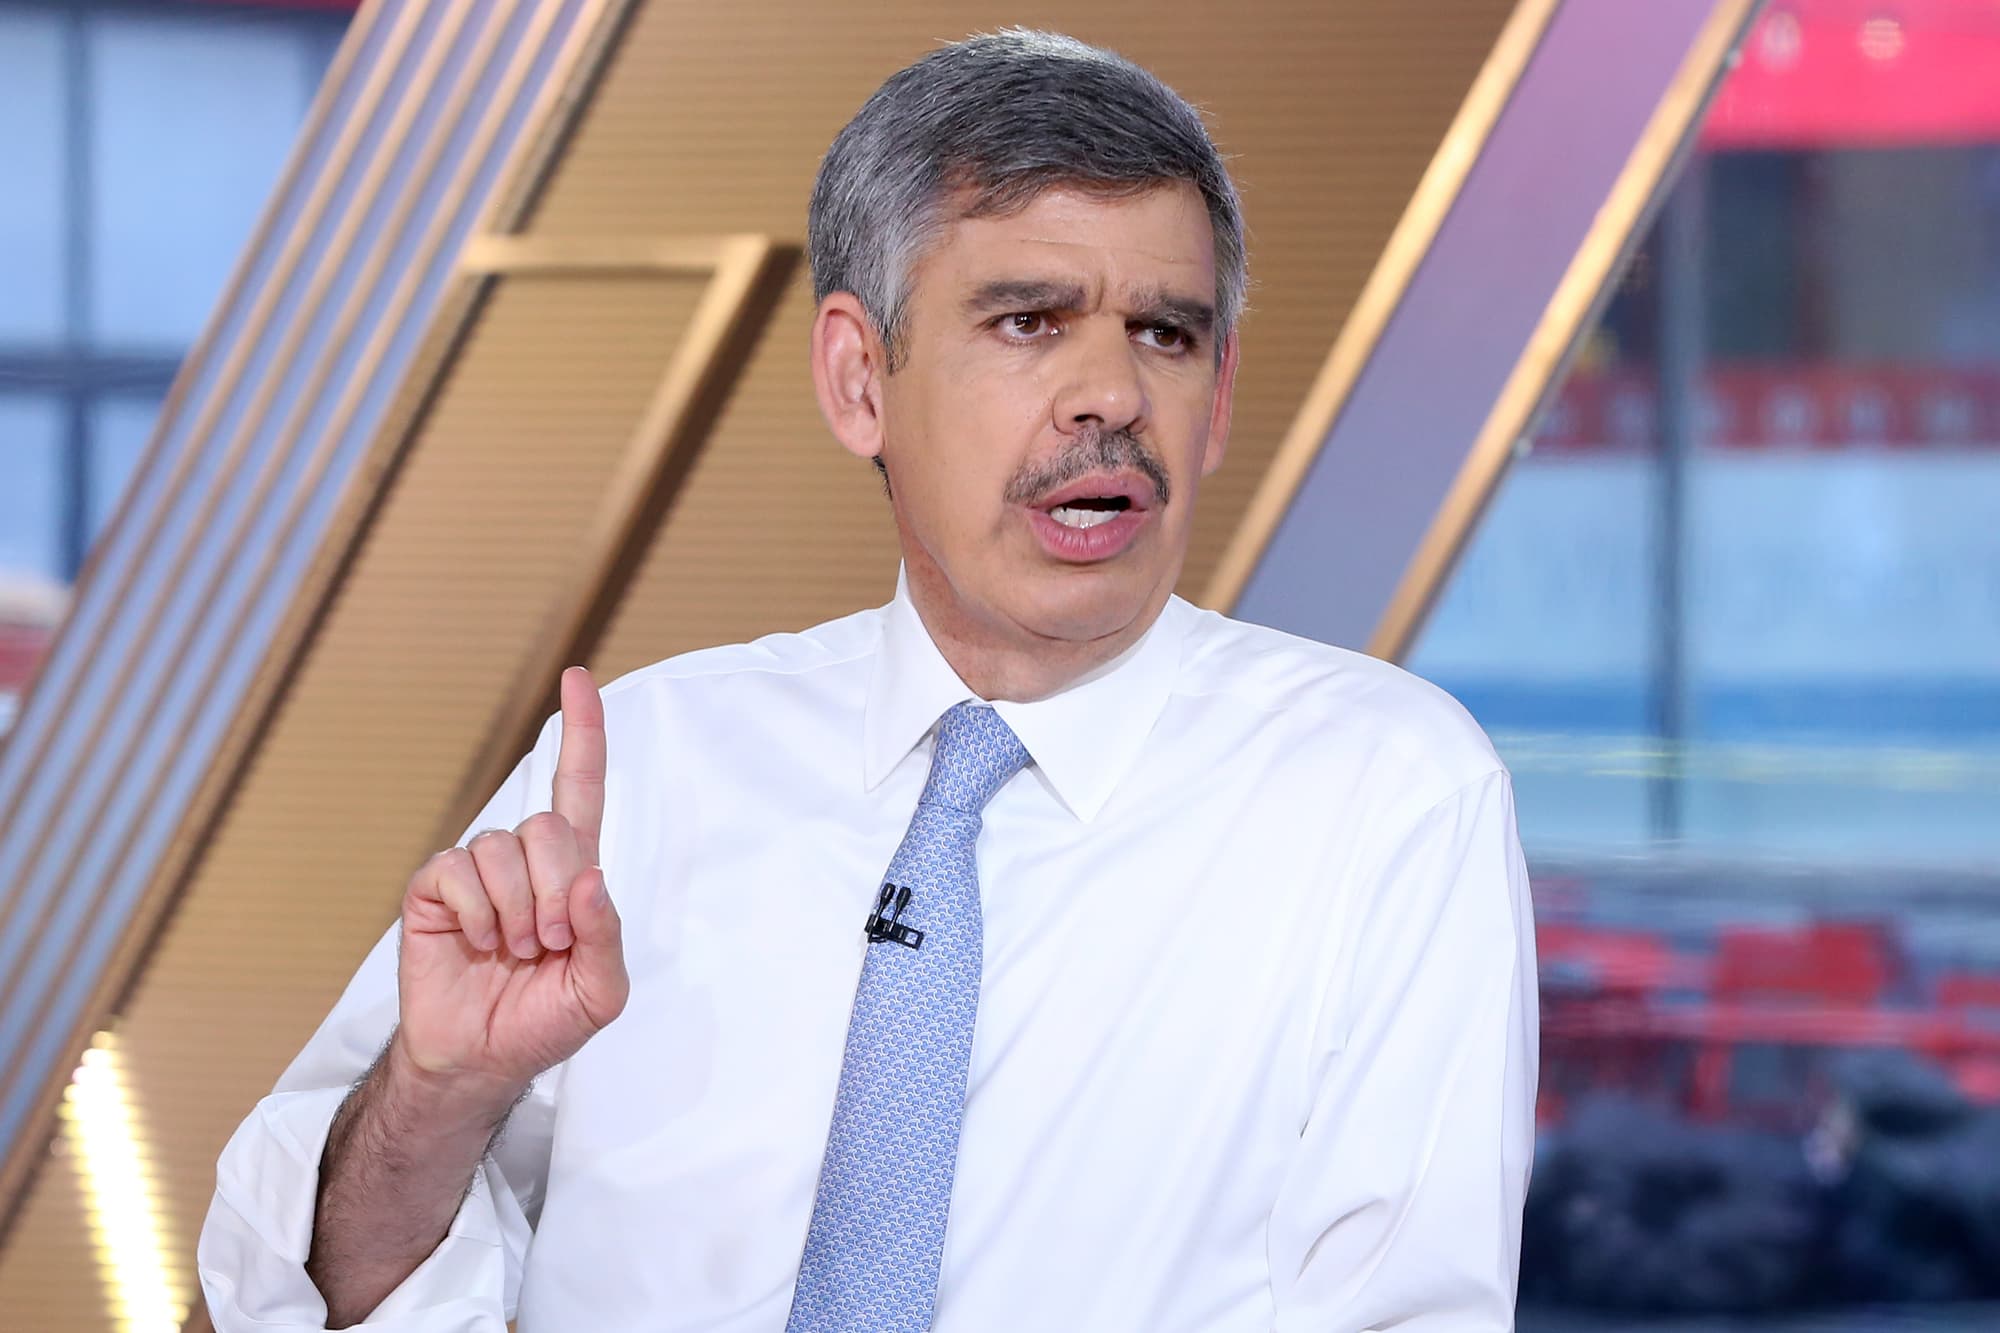 El-Erian says stock market conditioned to buy dips, and that could last until the end of the year